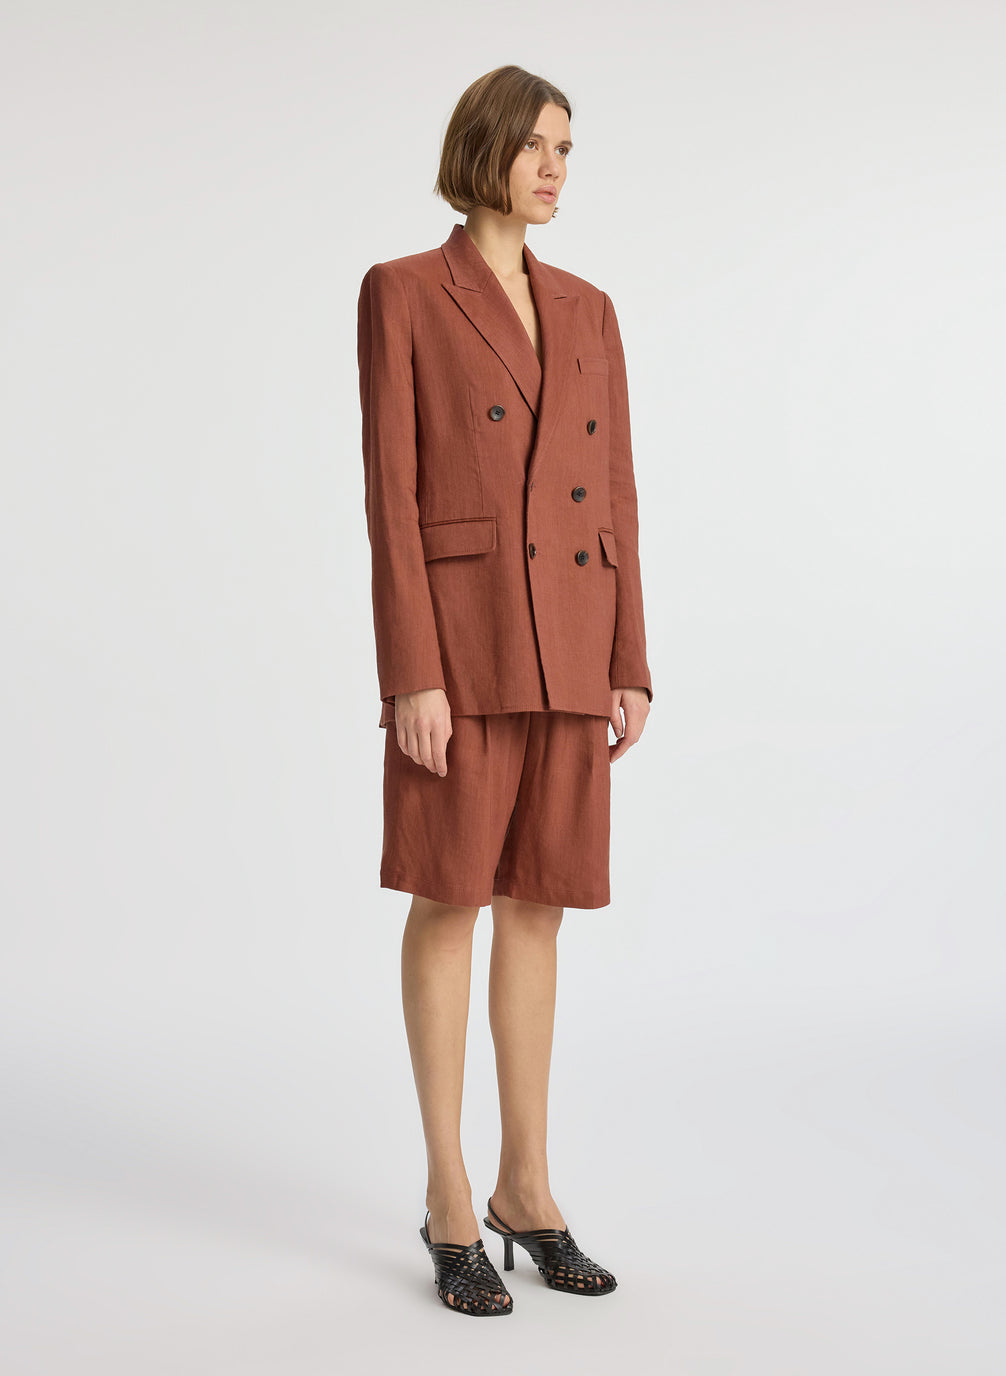 side view of woman wearing brown short suit